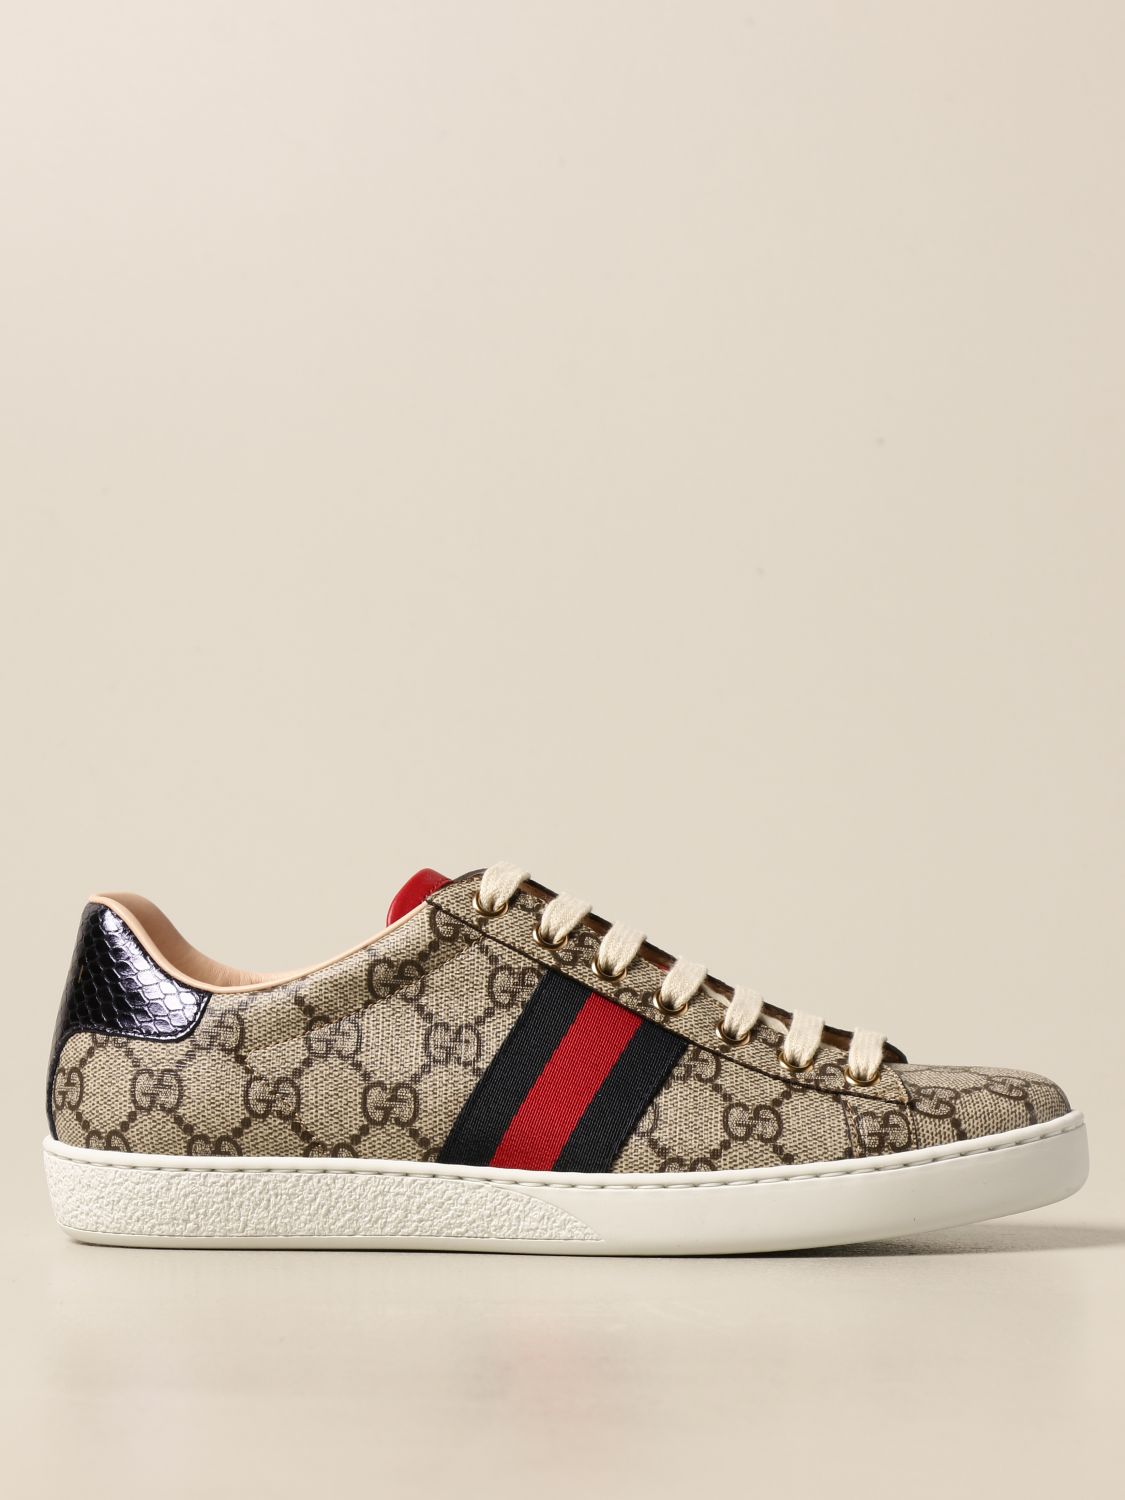 GUCCI: Ace sneakers in GG Supreme fabric with Web bands | Sneakers ...